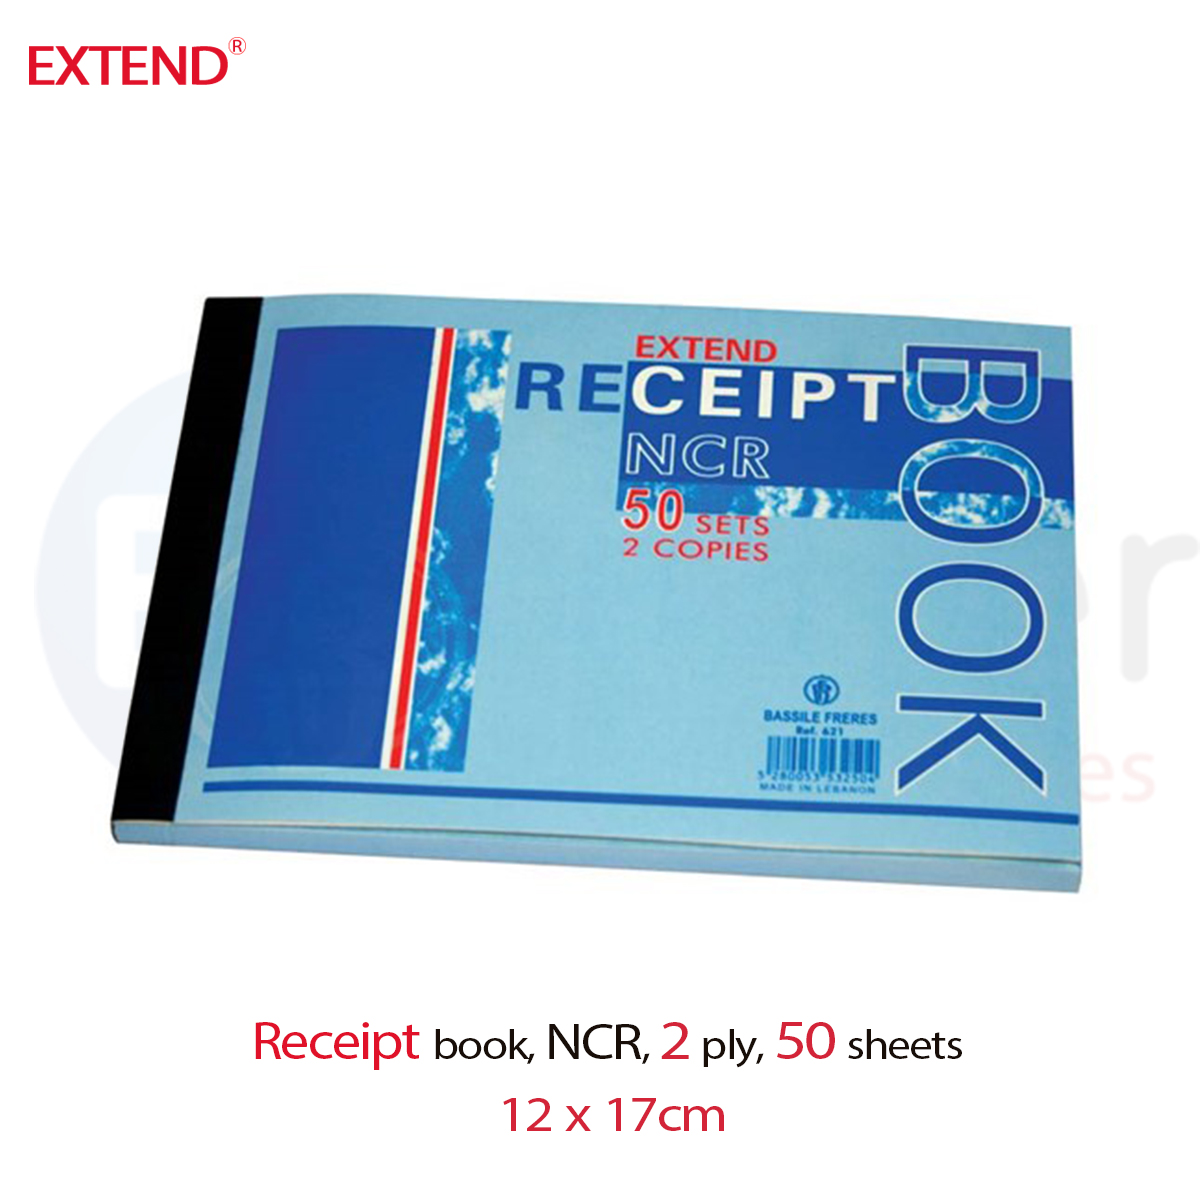 Receipt book, 50 sheets NCR 12x17 2ply